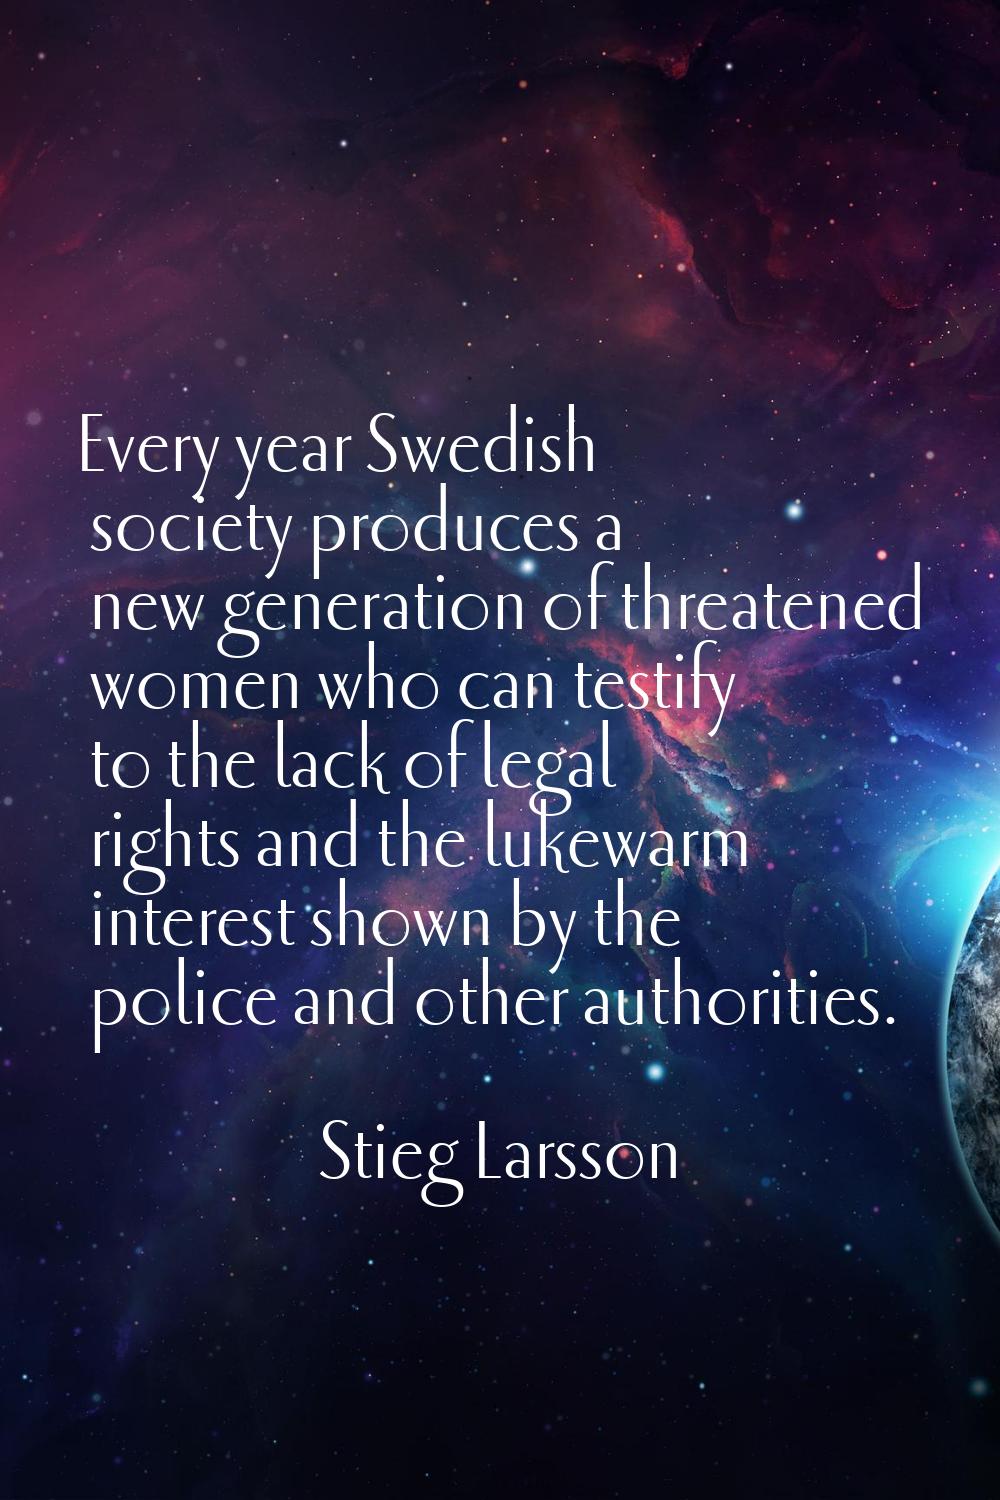 Every year Swedish society produces a new generation of threatened women who can testify to the lac